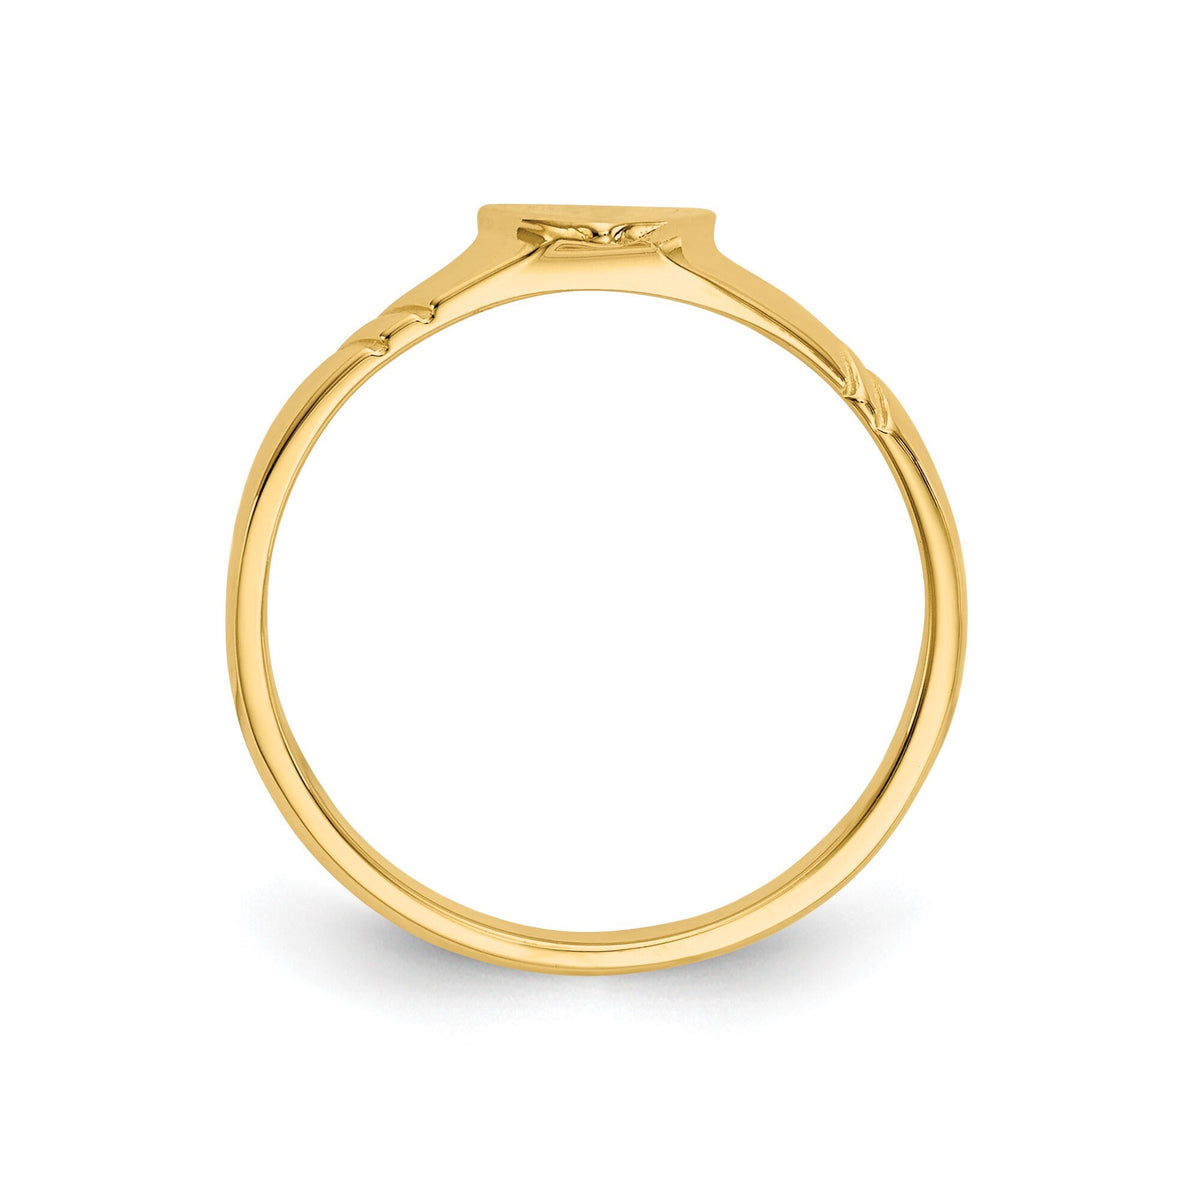 Genuine 14k Yellow Gold Heart Ring Baby to Toddler / Band Size 1- 5 Baby - Toddler-Small Adult Finger Size Children's Ring Band with Heart